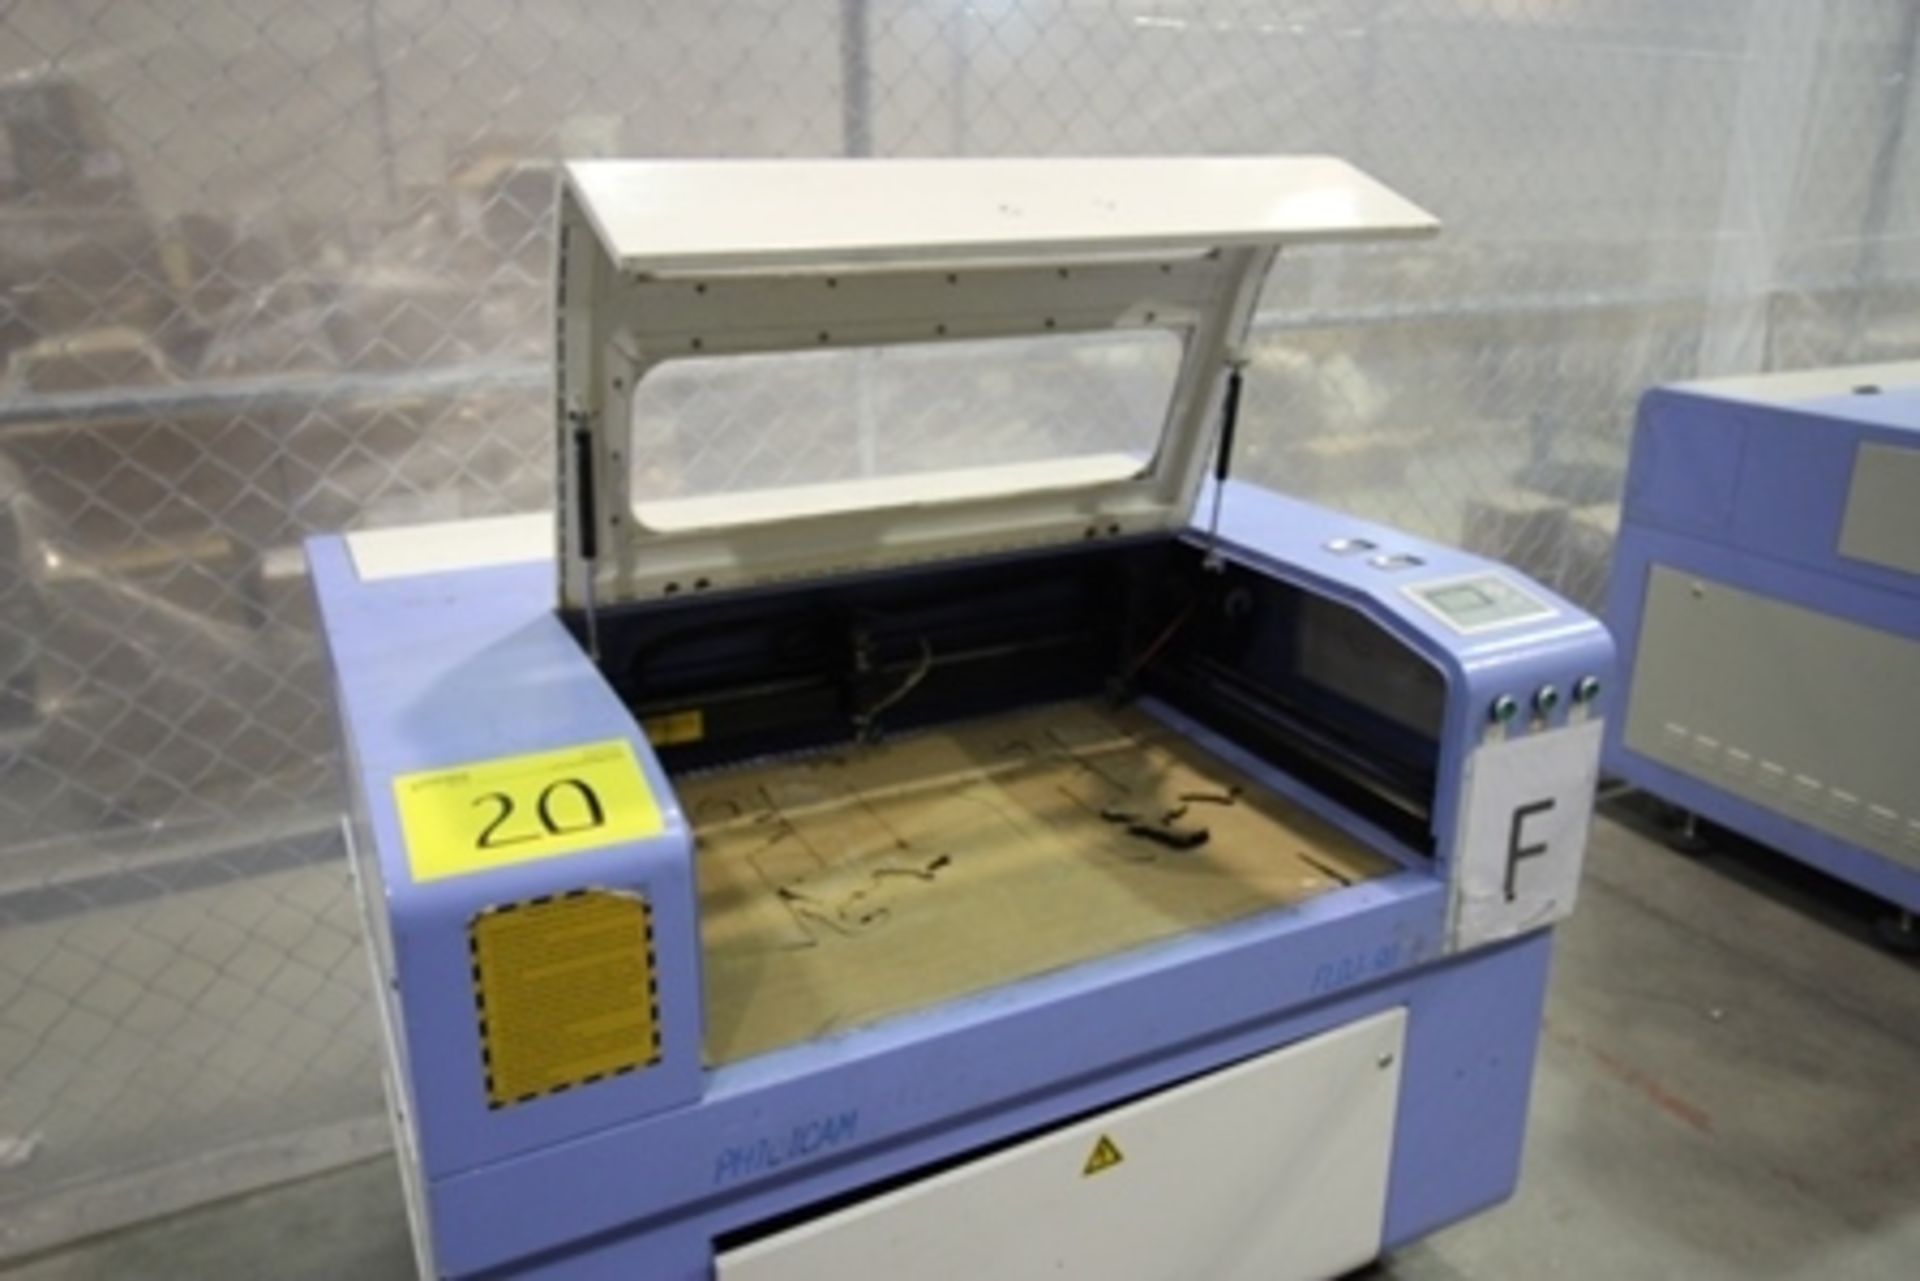 Phillican CO2 laser engraver and cutting machine, model 6090. - Image 12 of 23